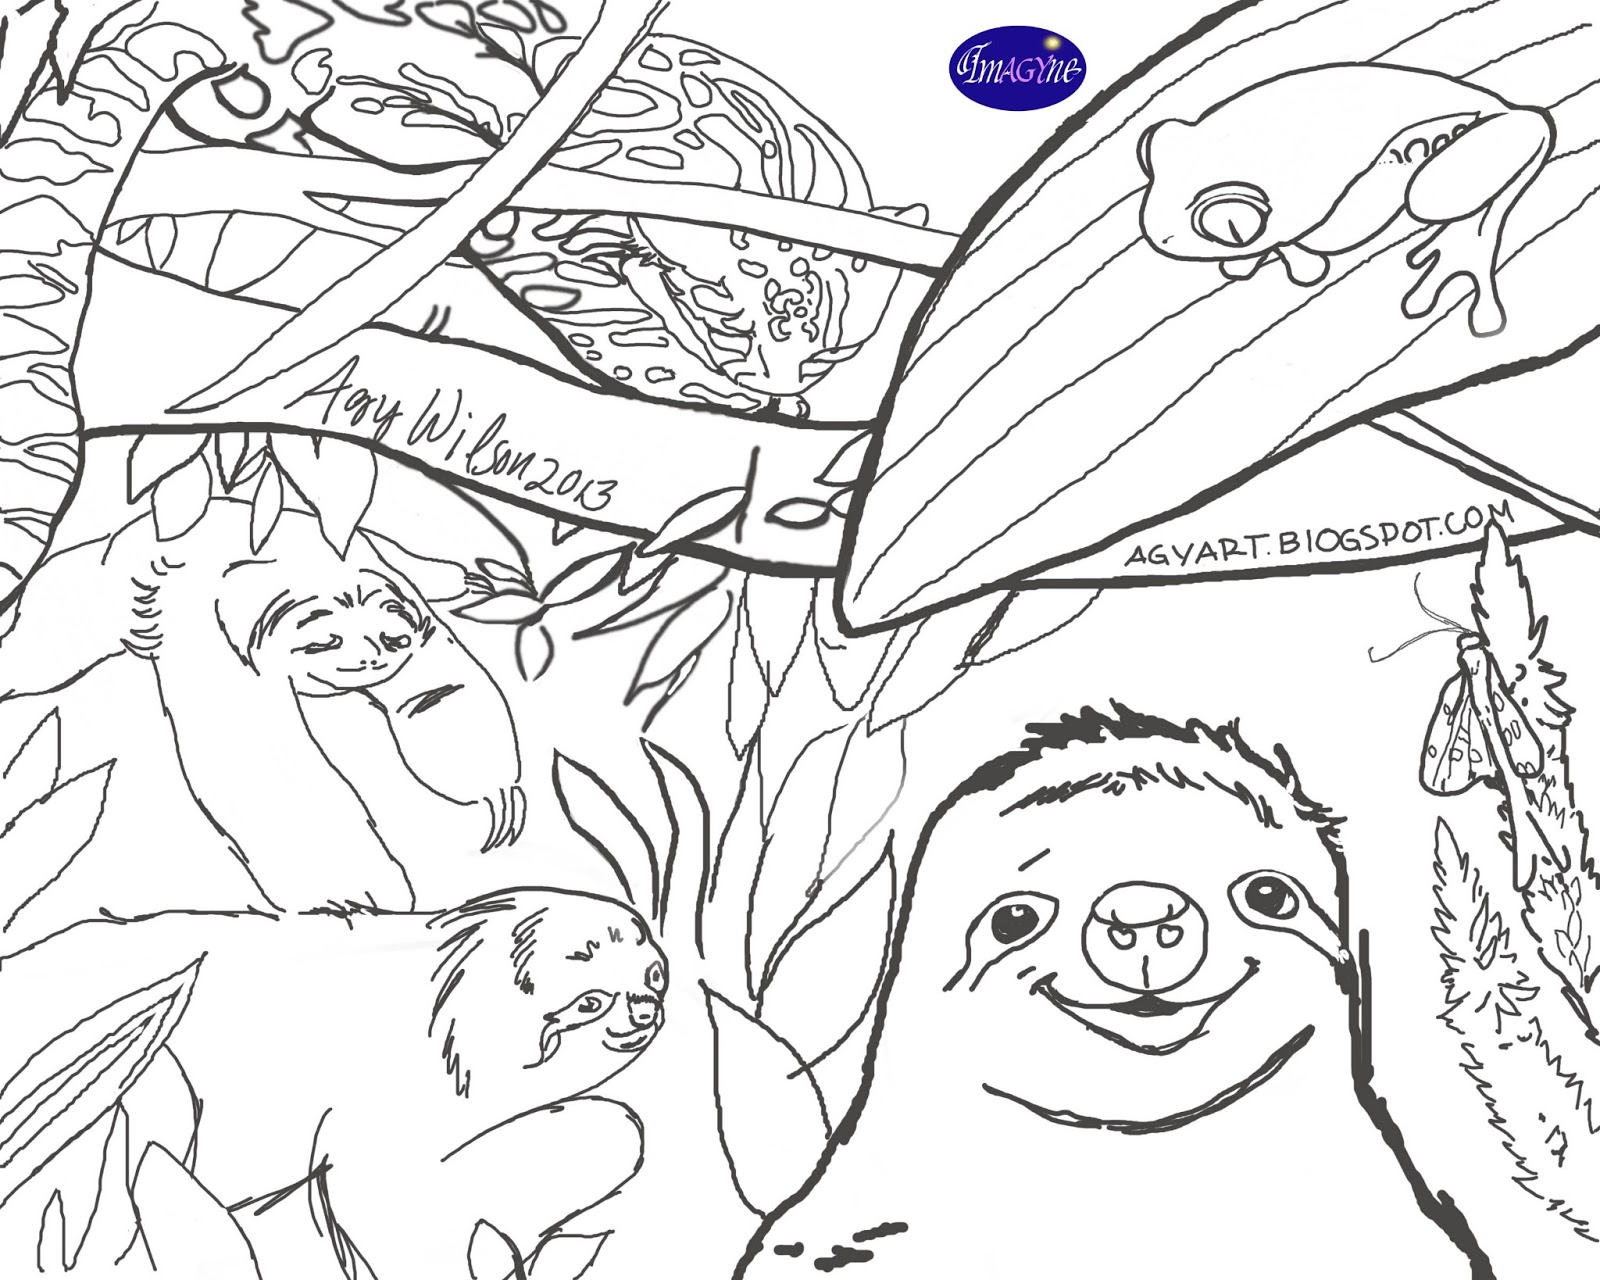 AGY WILSON'S ART: Viewed and reviewed.... and a slothful coloring page!